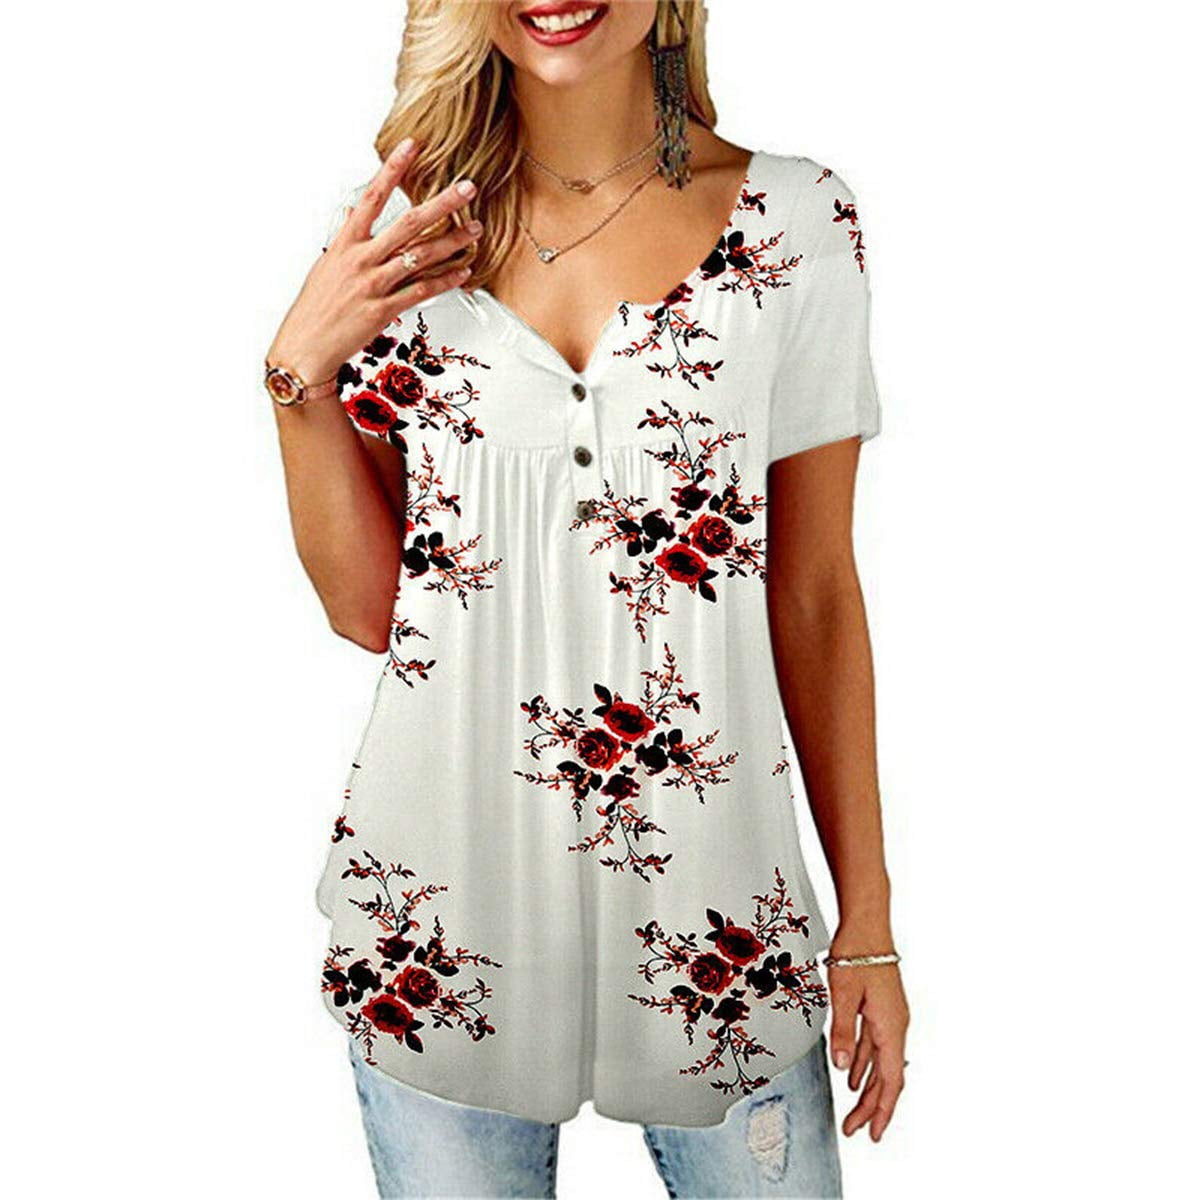 Womens Loose Plus Size Floral Print T-Shirt,Sharemen Ruffle Short Sleeve V-Neck Basic Top for Laides and Girl 